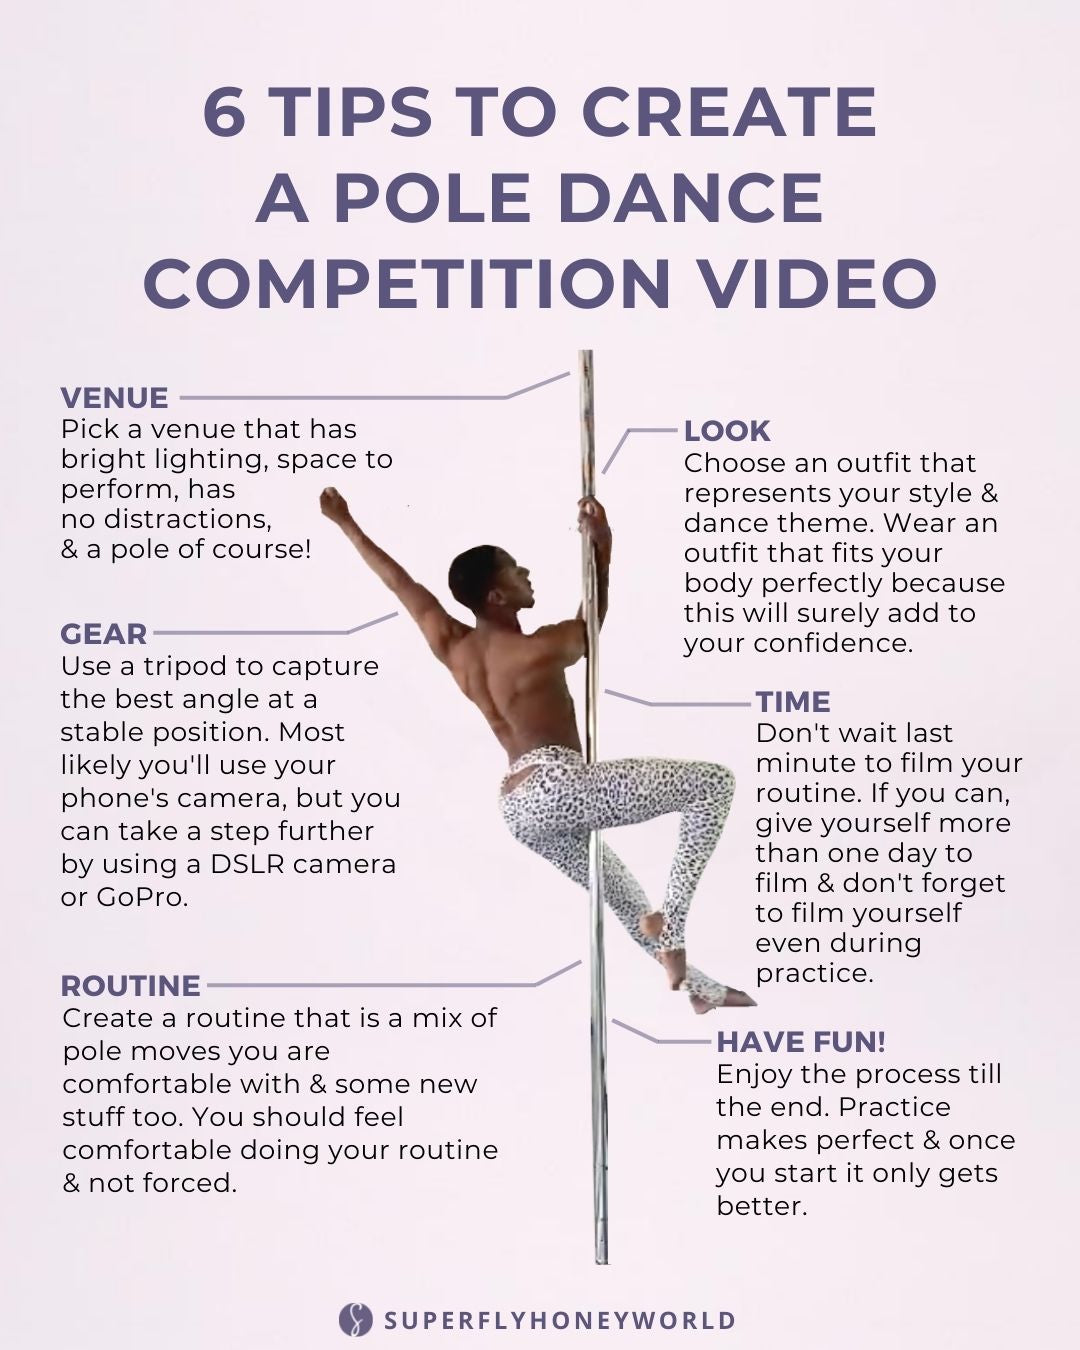 https://www.superflyhoney.com/cdn/shop/articles/tips_to_create_a_pole_dance_competition_video_1080x.jpg?v=1624719722